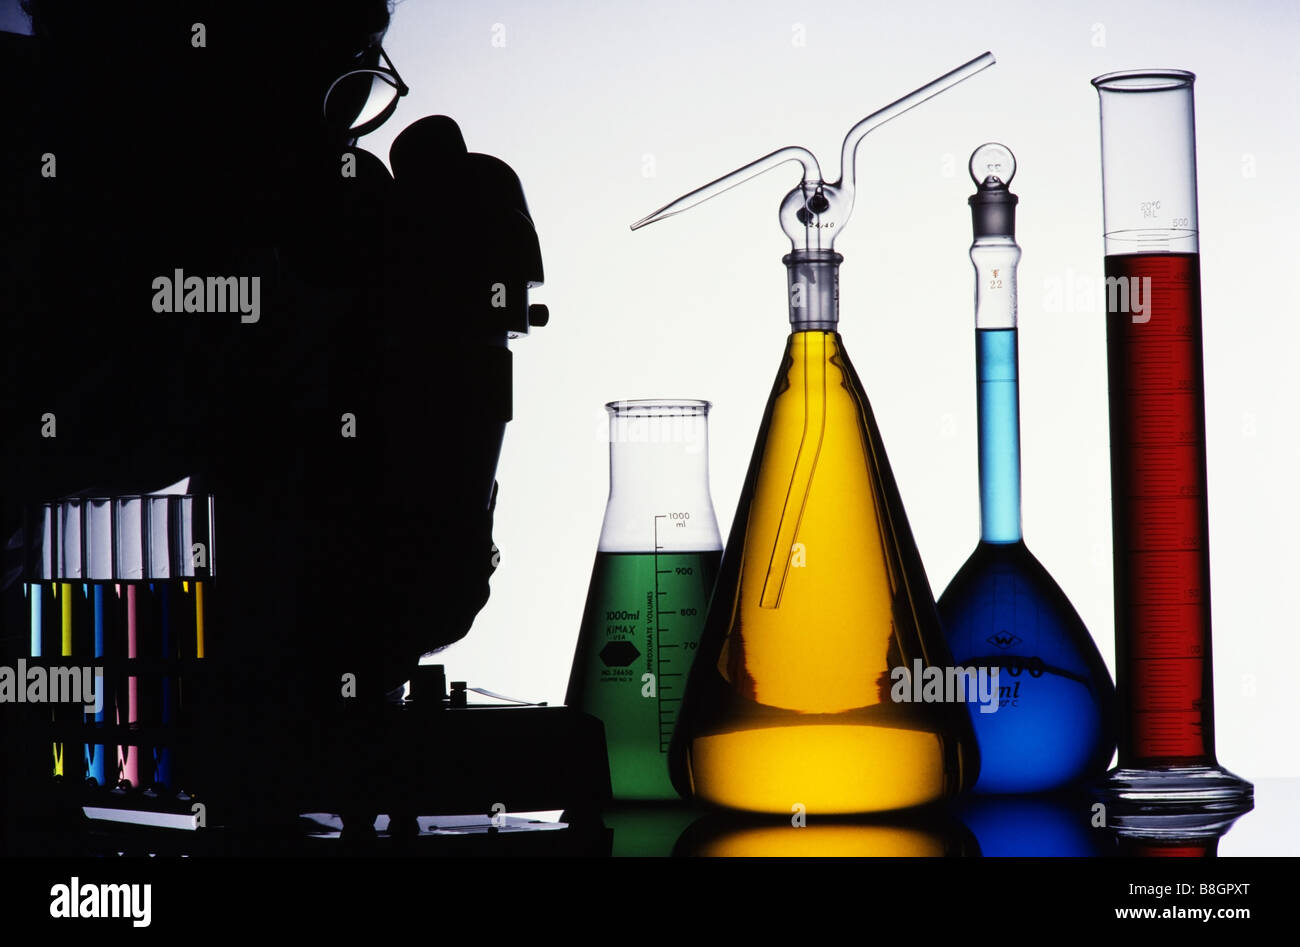 People working,Chemistry apparatus, phamaceutical prodution, scientist with microscope Stock Photo